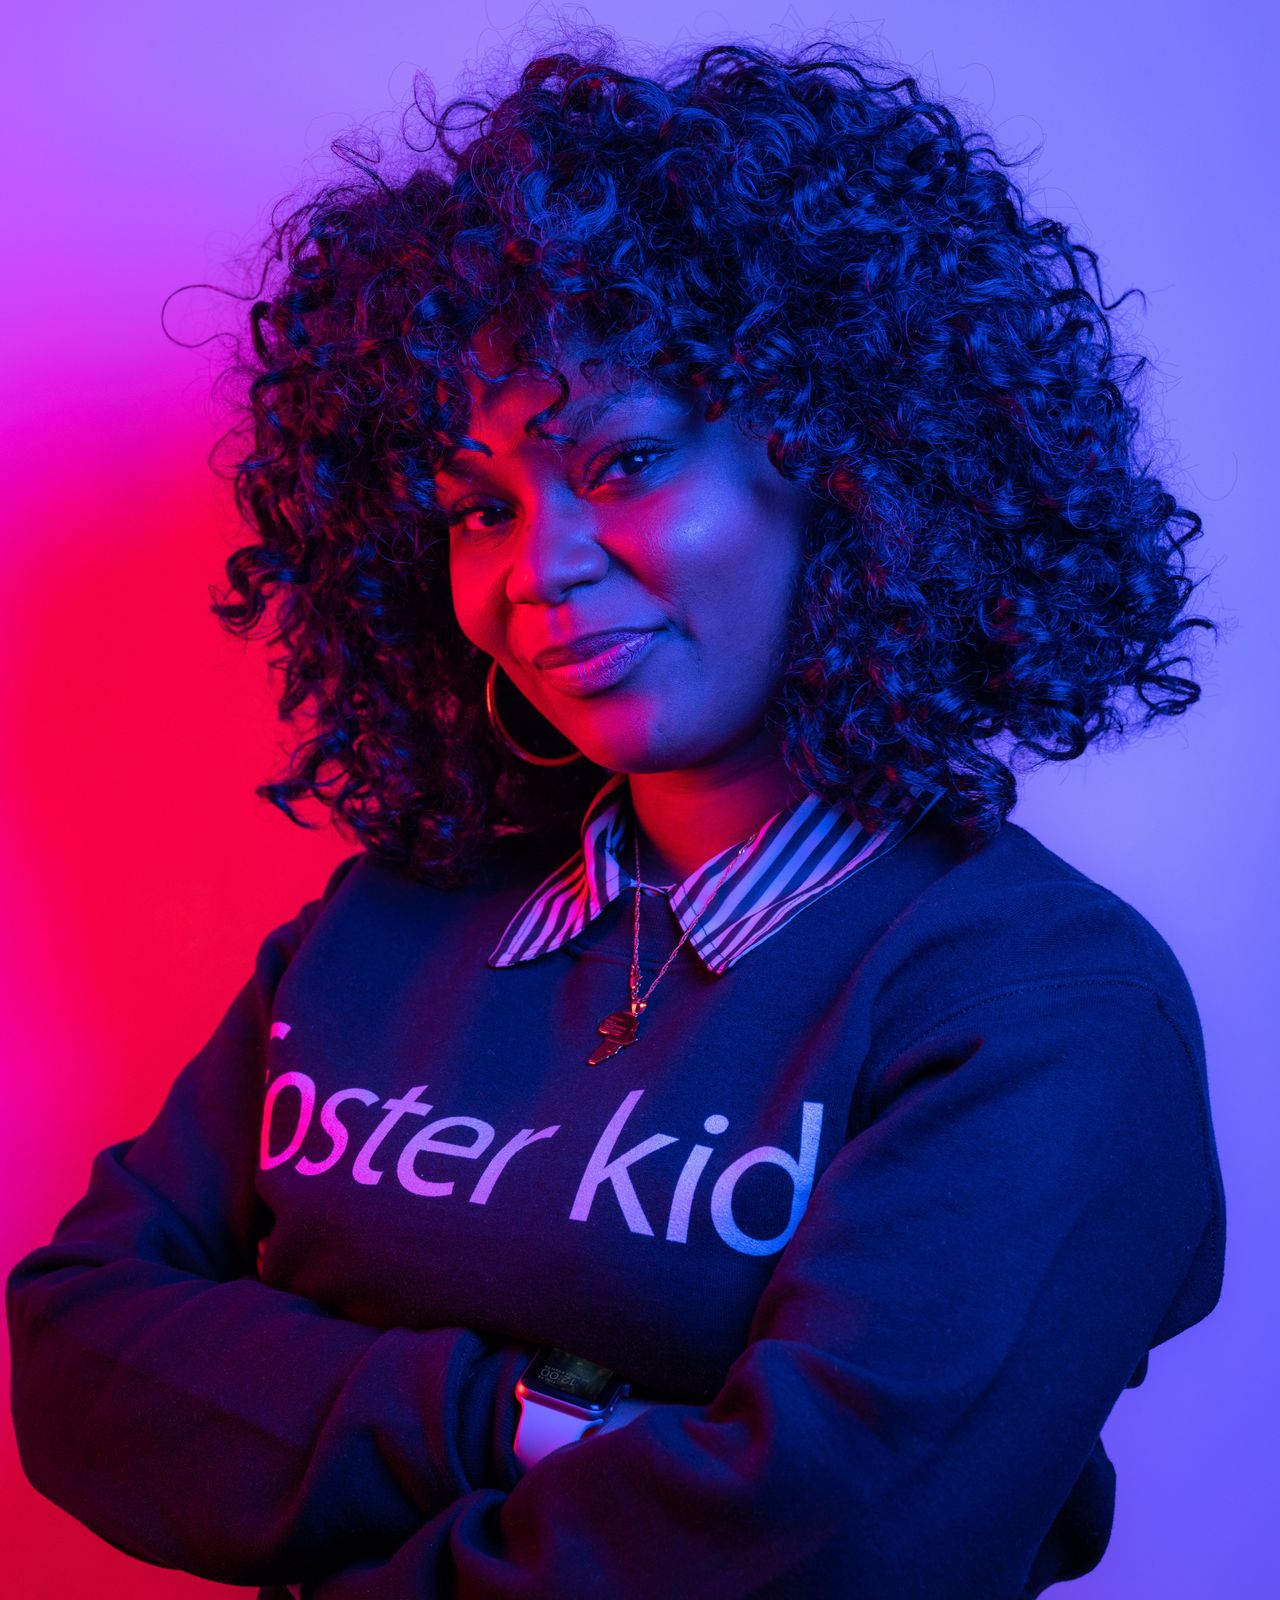 Kevinee Gilmore built #FosterCare, a social media movement that advocates for foster kids by connecting them with access to opportunities and mentors they wouldn’t have otherwise.